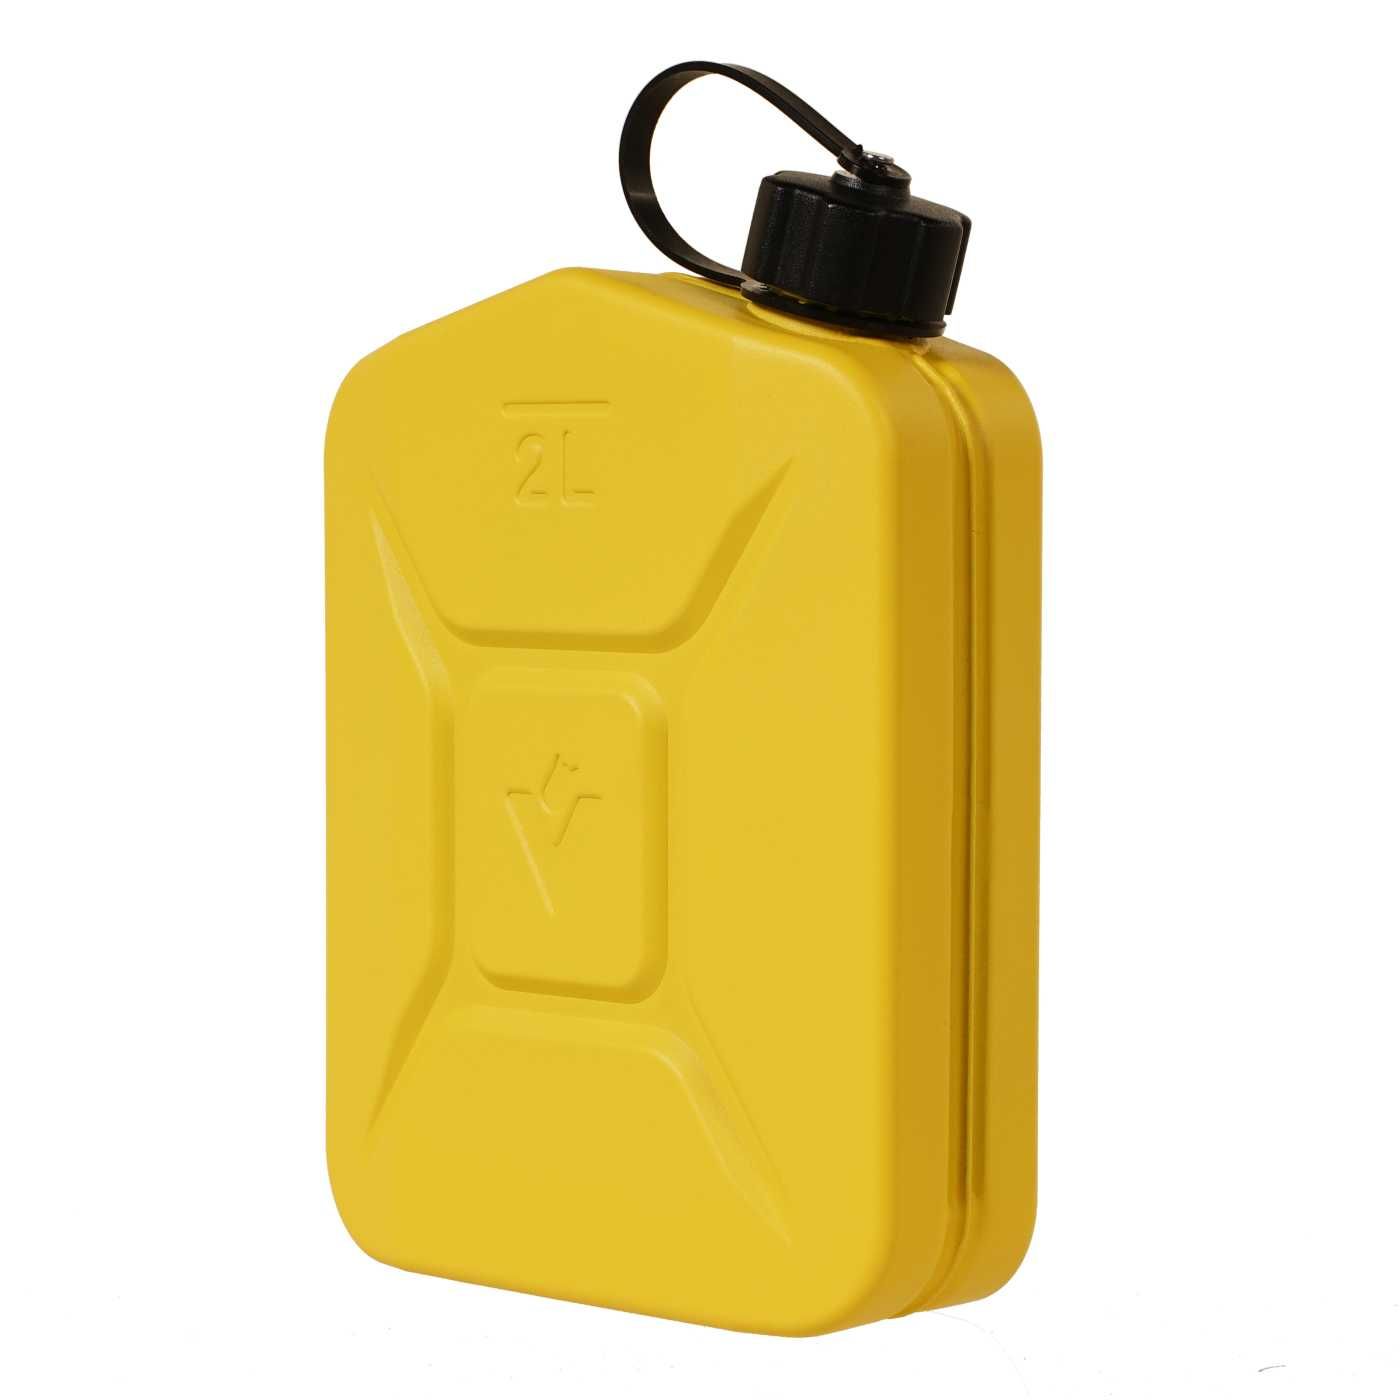 Metal fuel can Touratech Voyager 2 litre  Touratech: Online shop for  motorbike accessories